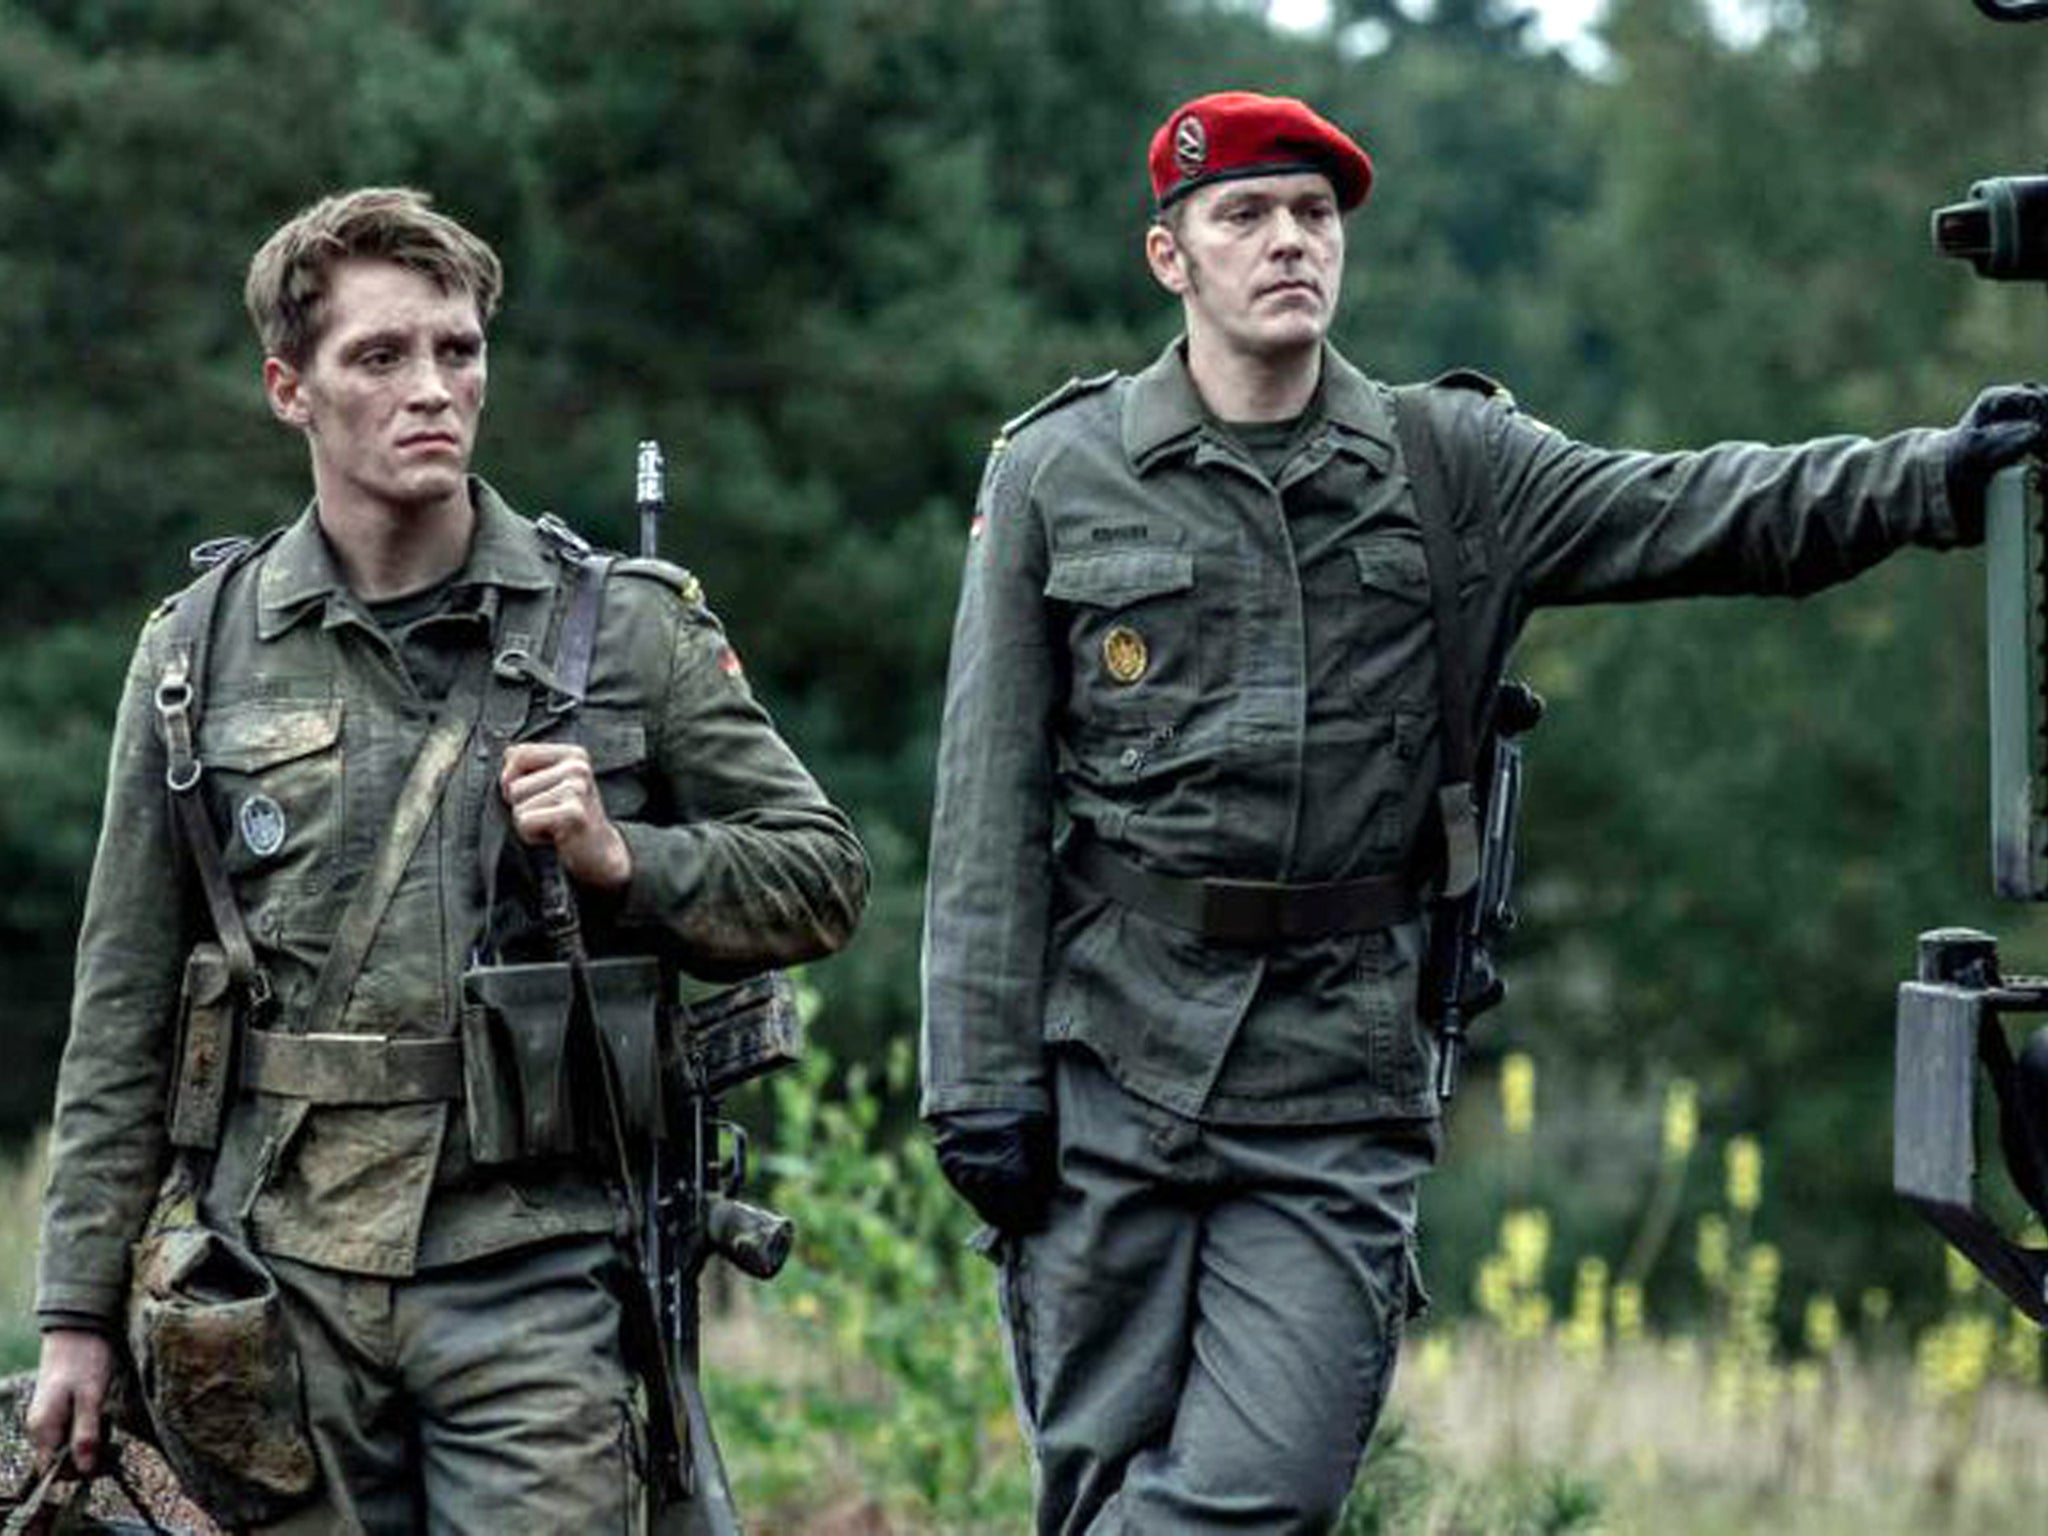 The platform will be boosted by a joint Channel 4 screening for its opening attraction, Deutschland 83